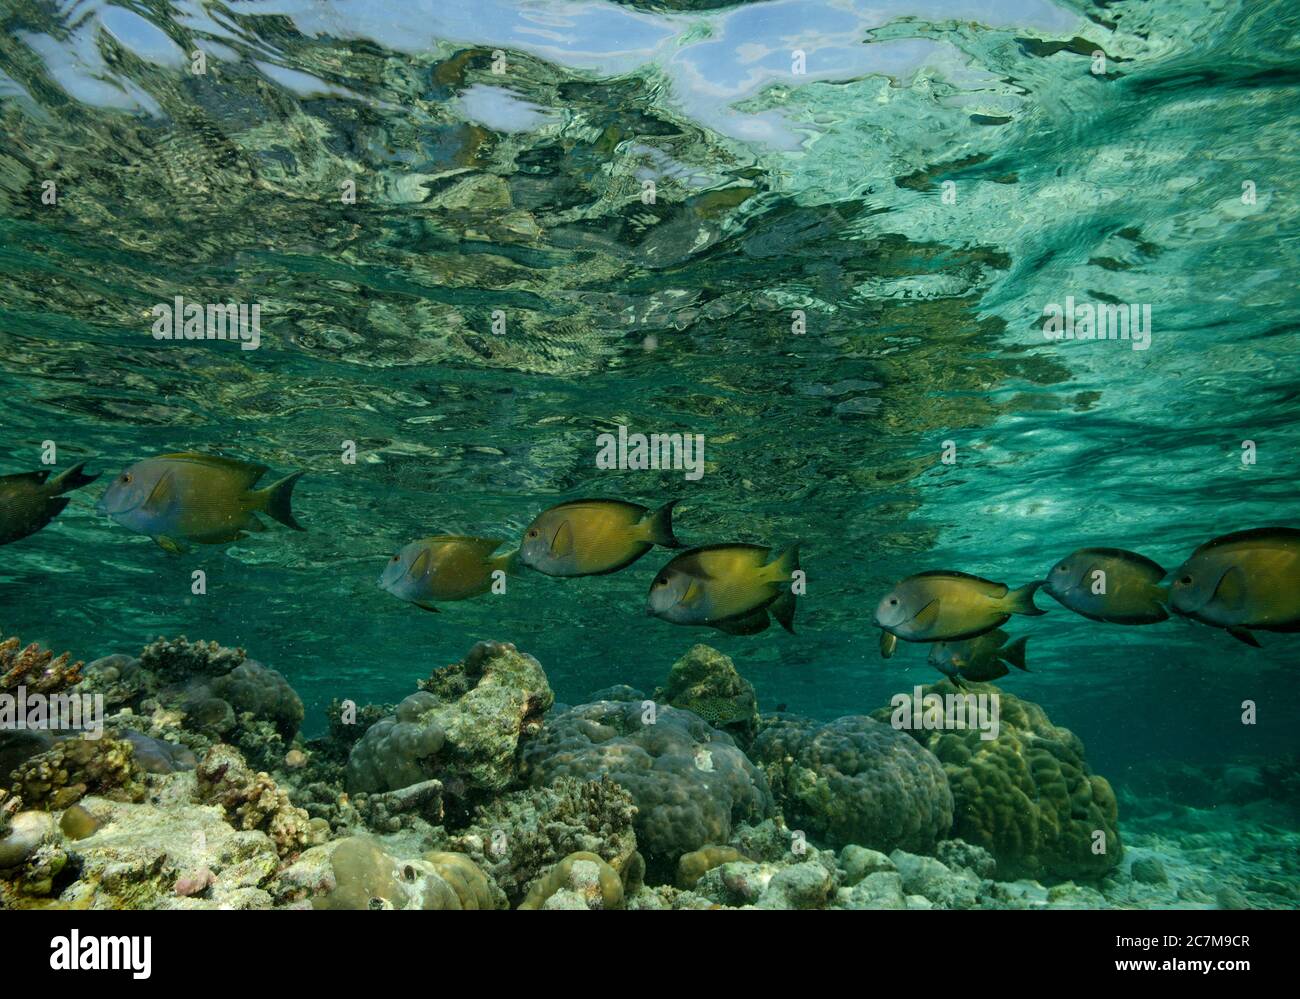 Shoal of Lined Bristletooth, Ctenochaetus striatus, swimming over coral reef in Bathala, Maldives Stock Photo